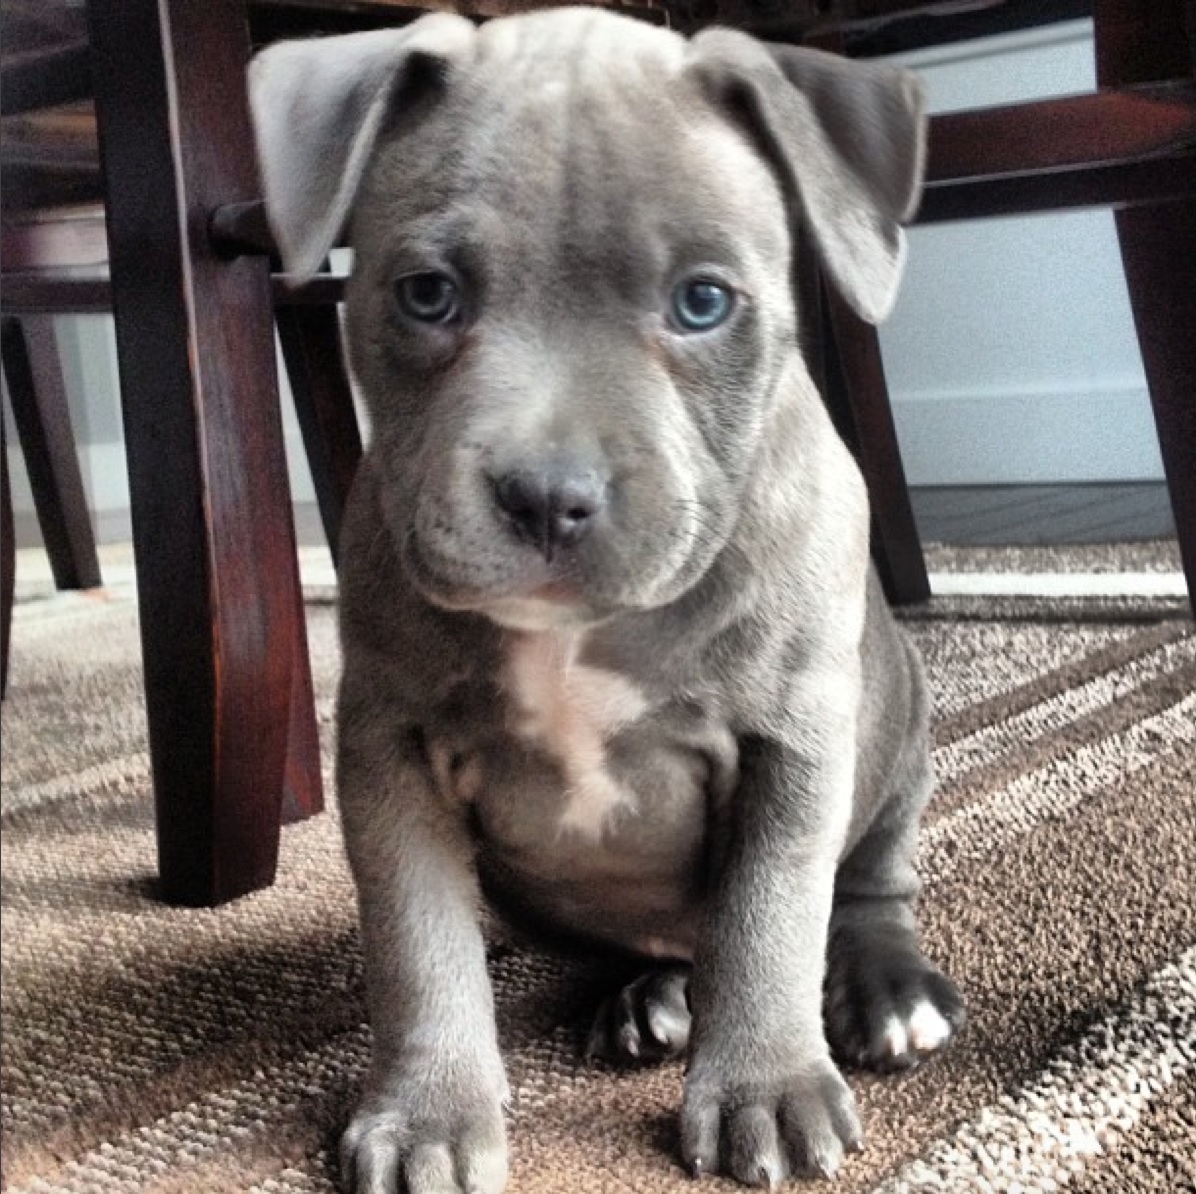 A blue Pitbull puppy sitting on the floor with its adorable face